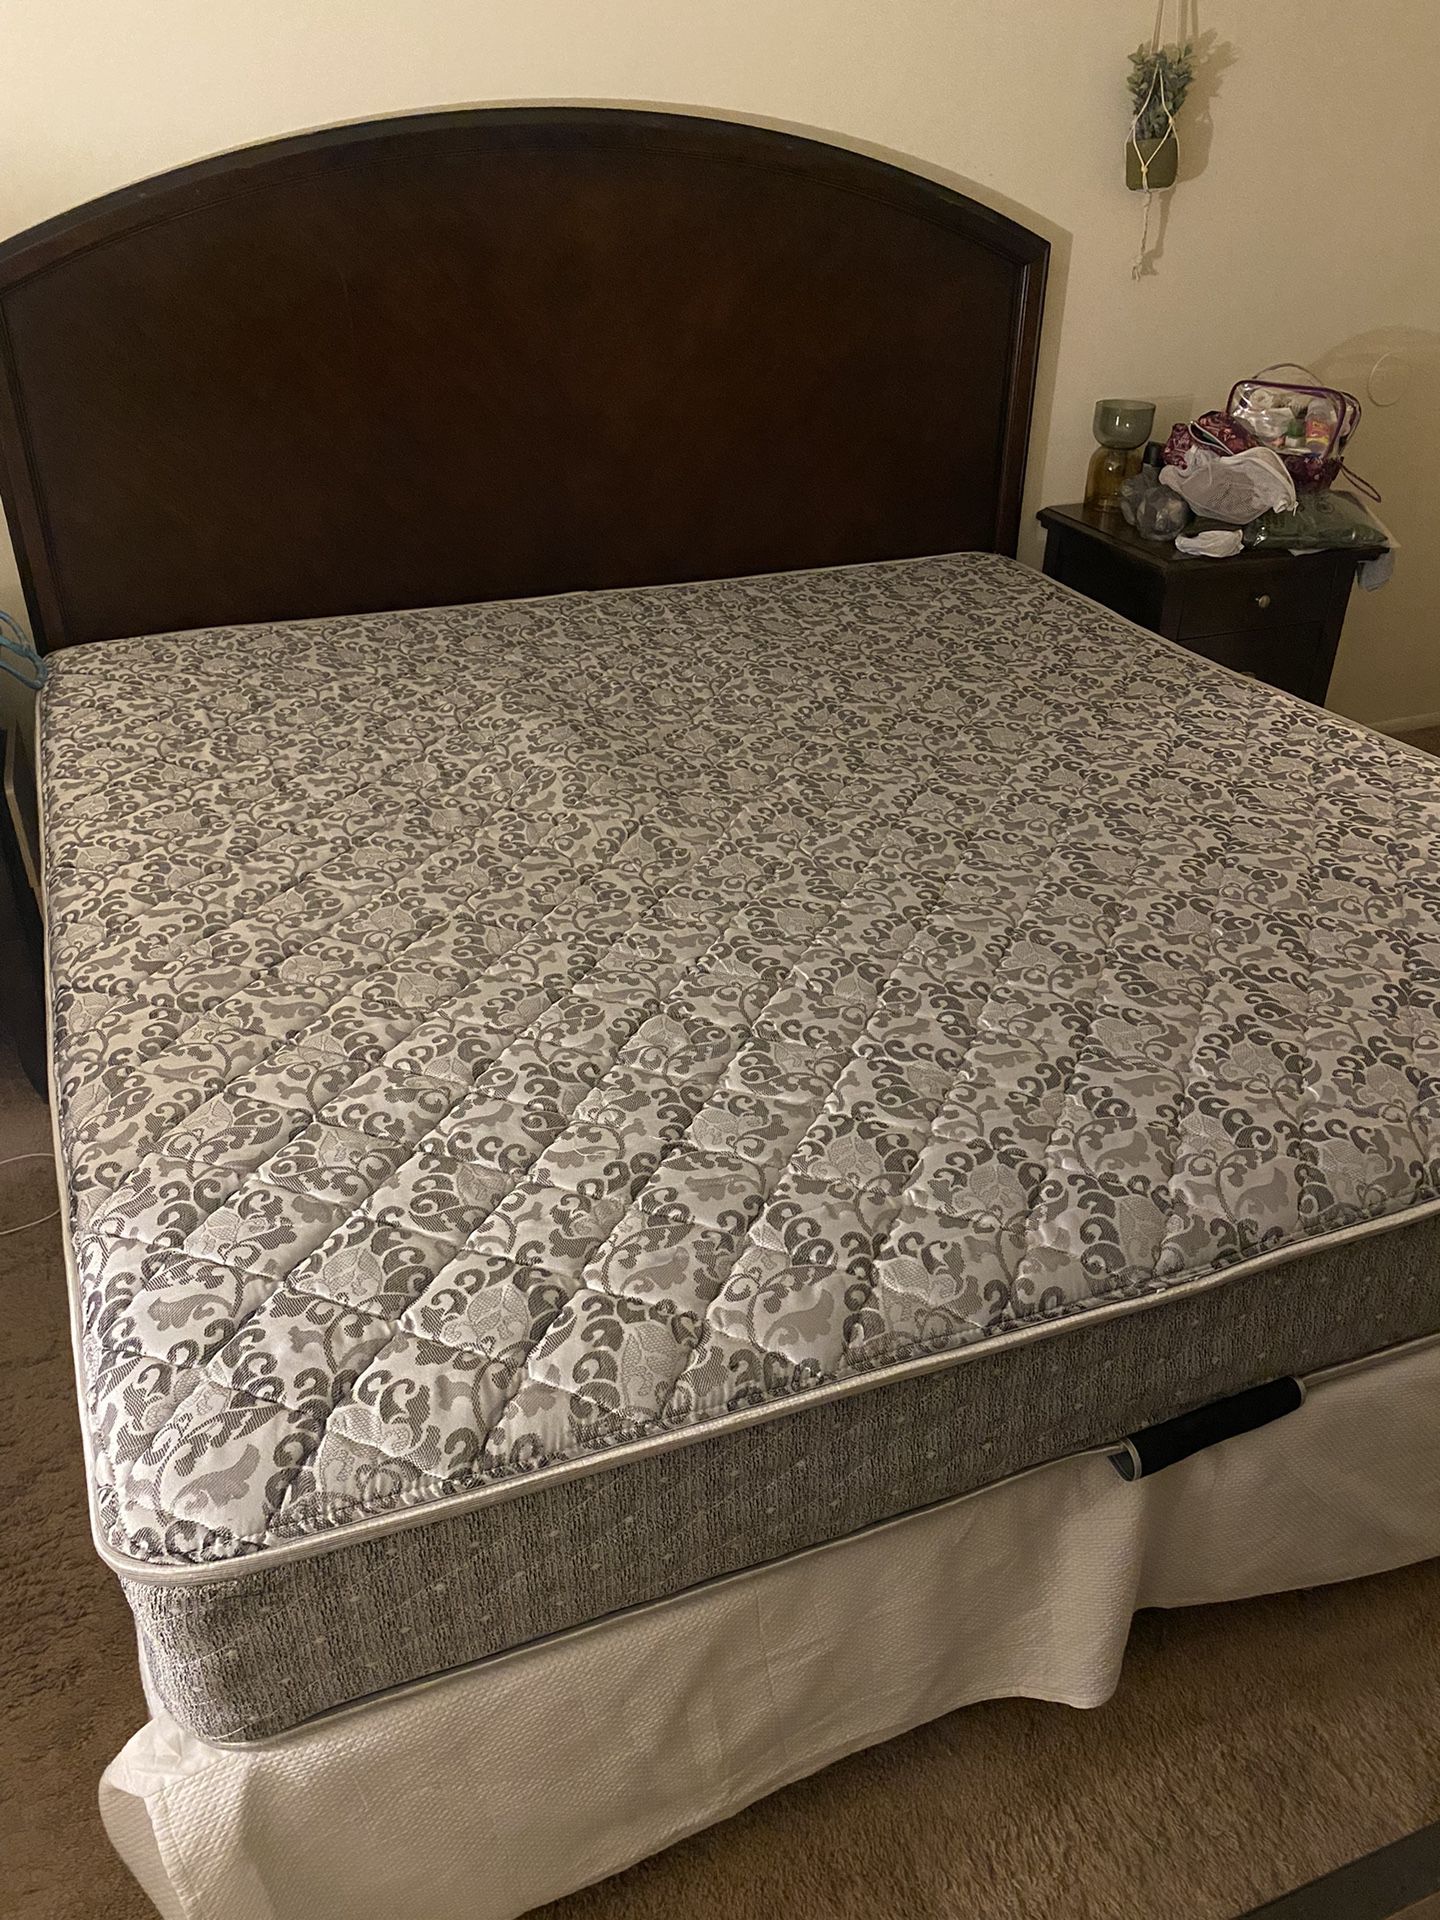 king Size  Matress And Box Springs FREE!!!!!!!!!!!Pick up Today